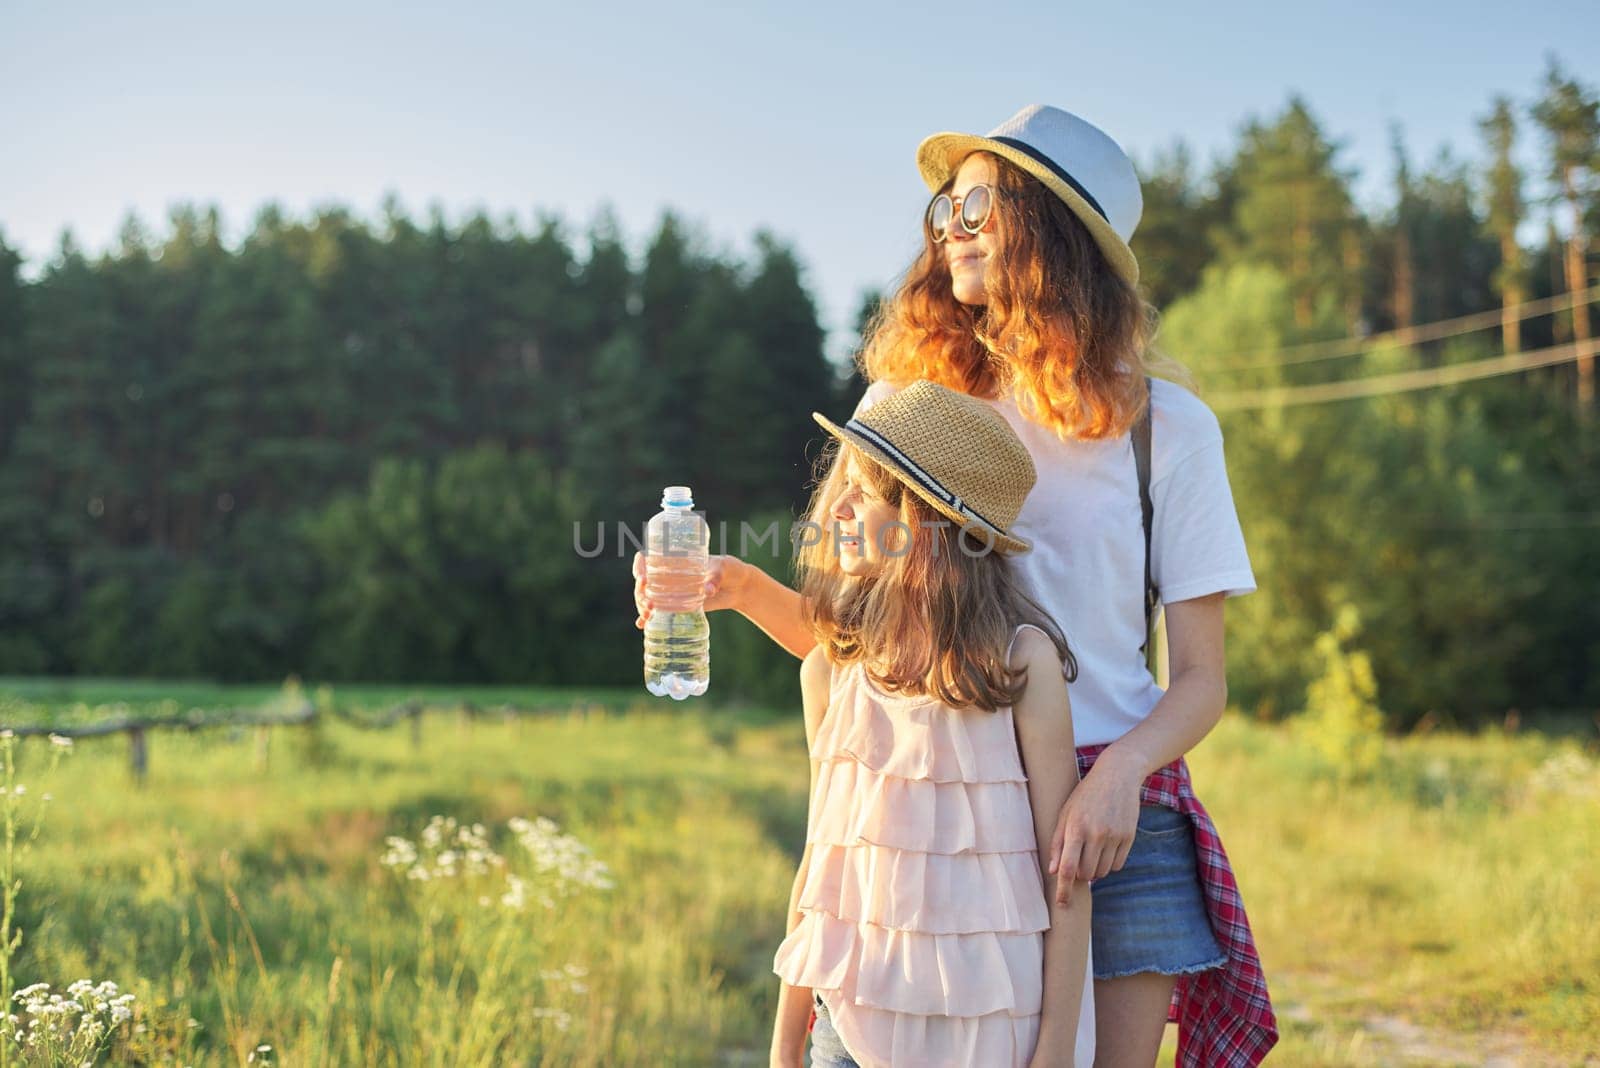 Children two girls sisters with bottle of water on hot summer day in nature, rural landscape, country road background